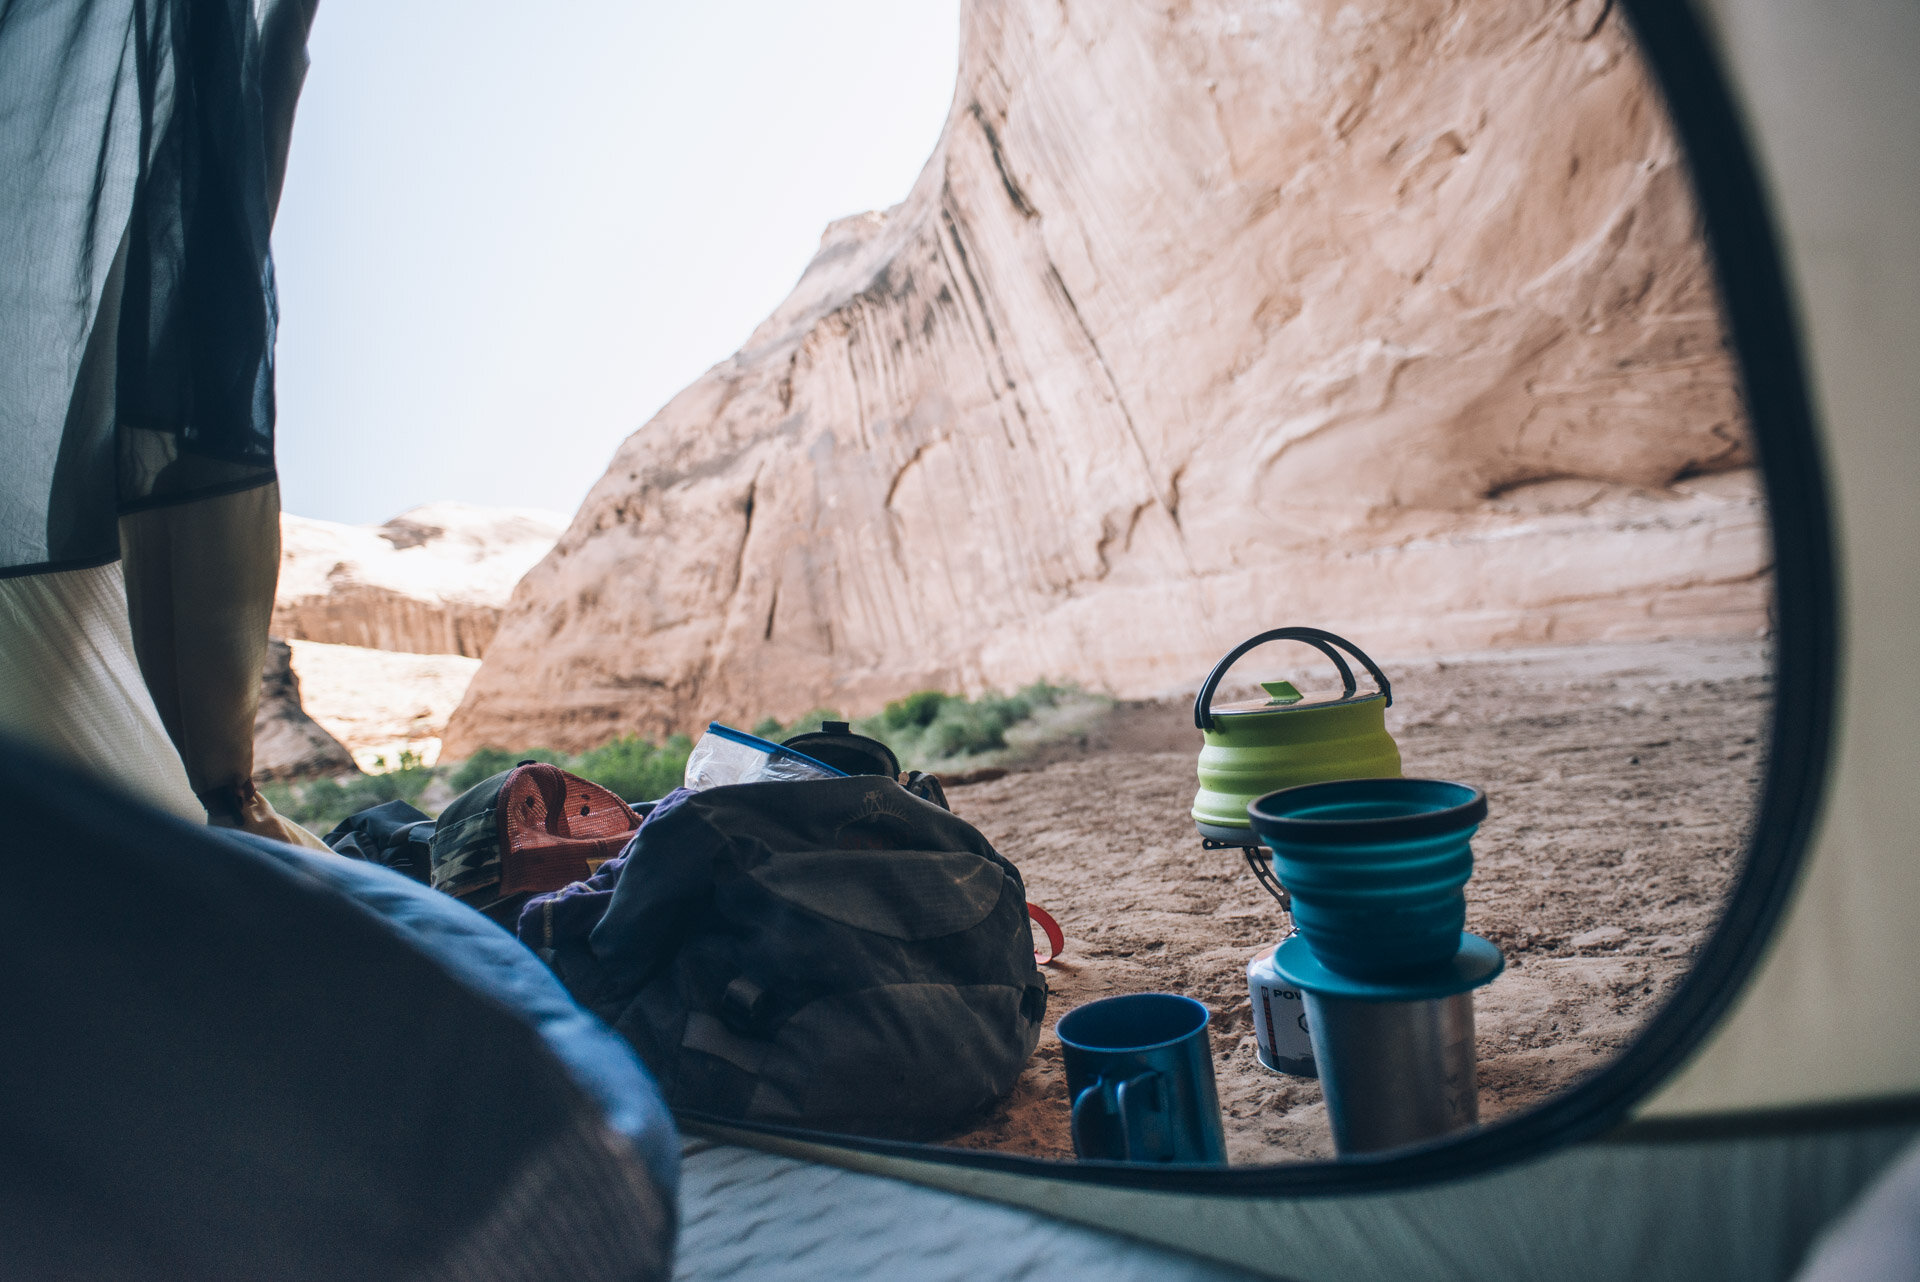 Spring-backpacking-trip-to-Forty-Mile-Creek-Willow-Canyon-via-Hole-in-the-Rock-Road-in-Grand-Staircase-Escalante-National-Monument-Utah